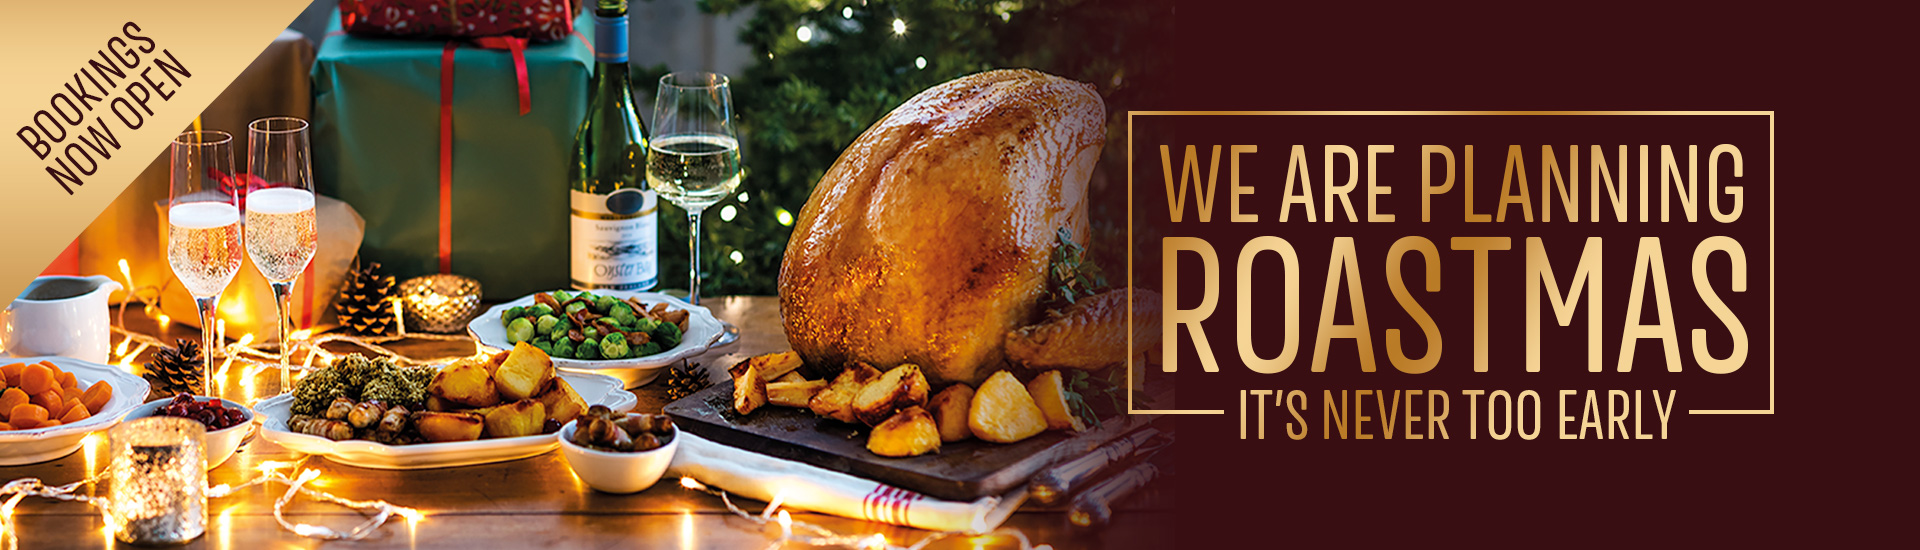 Christmas 2022 at your local Toby Carvery Worcester Park | Home of the Roast